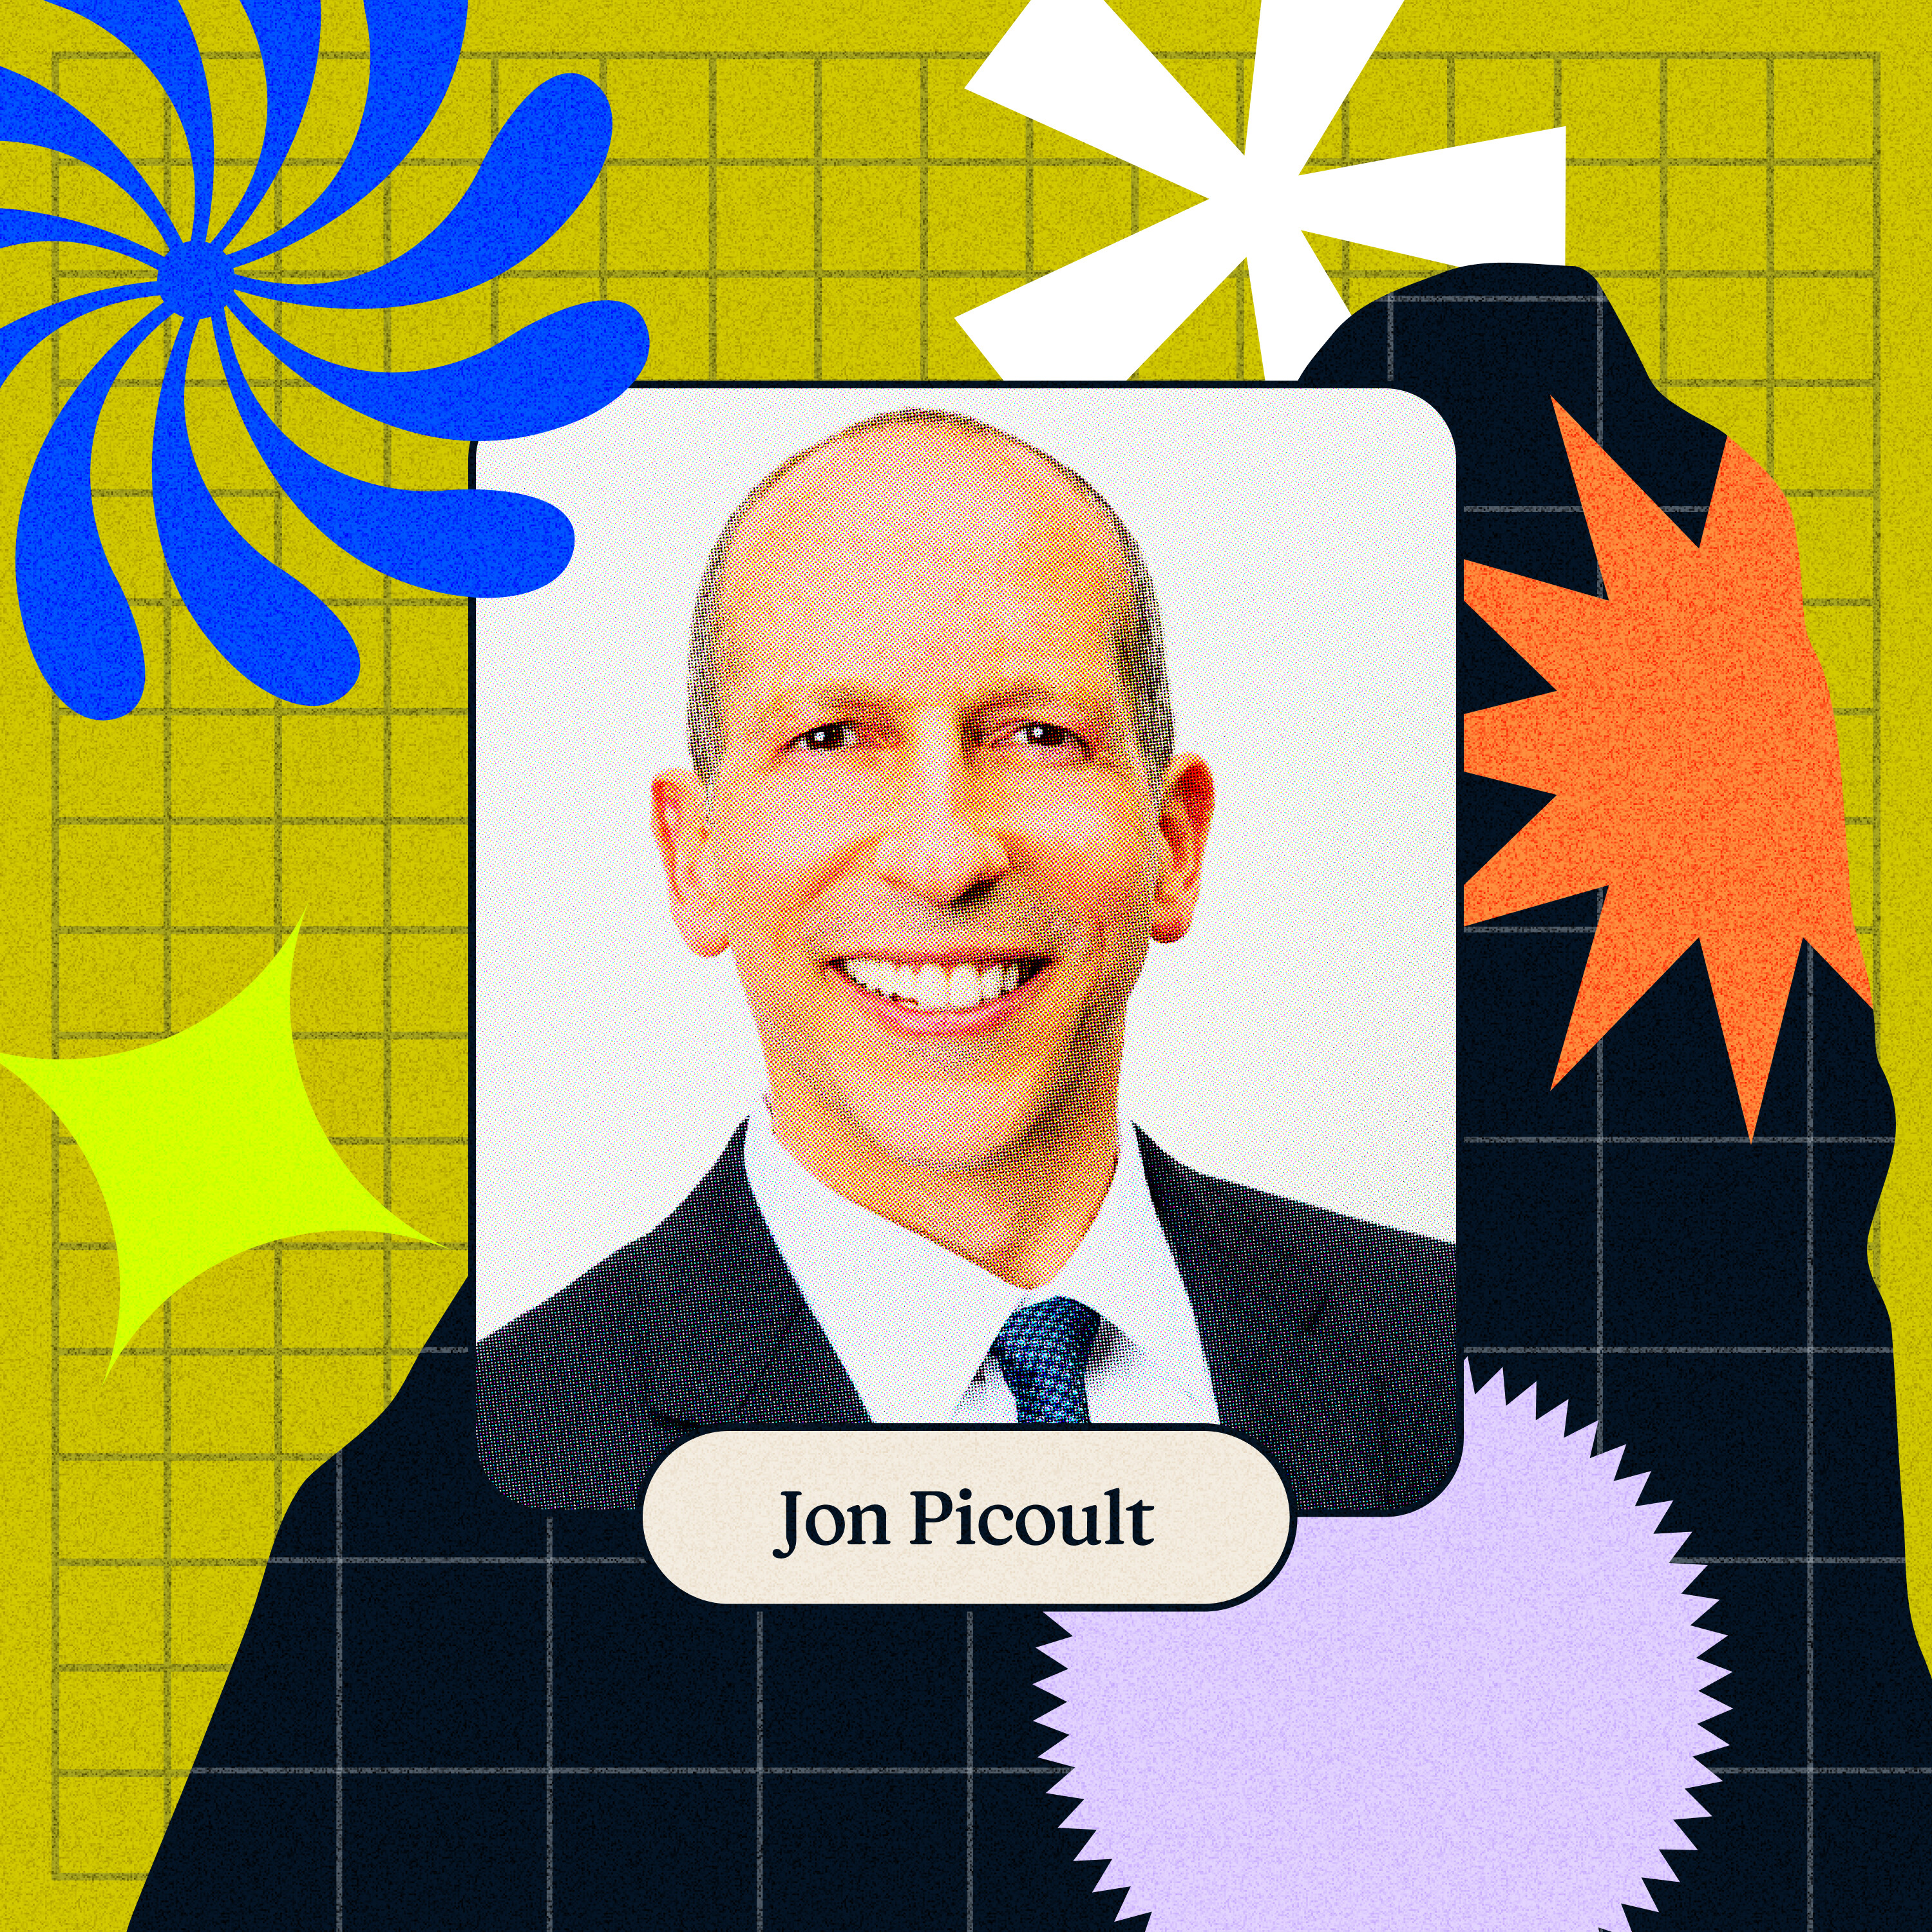 CX expert Jon Picoult on shaping memories, not just experiences